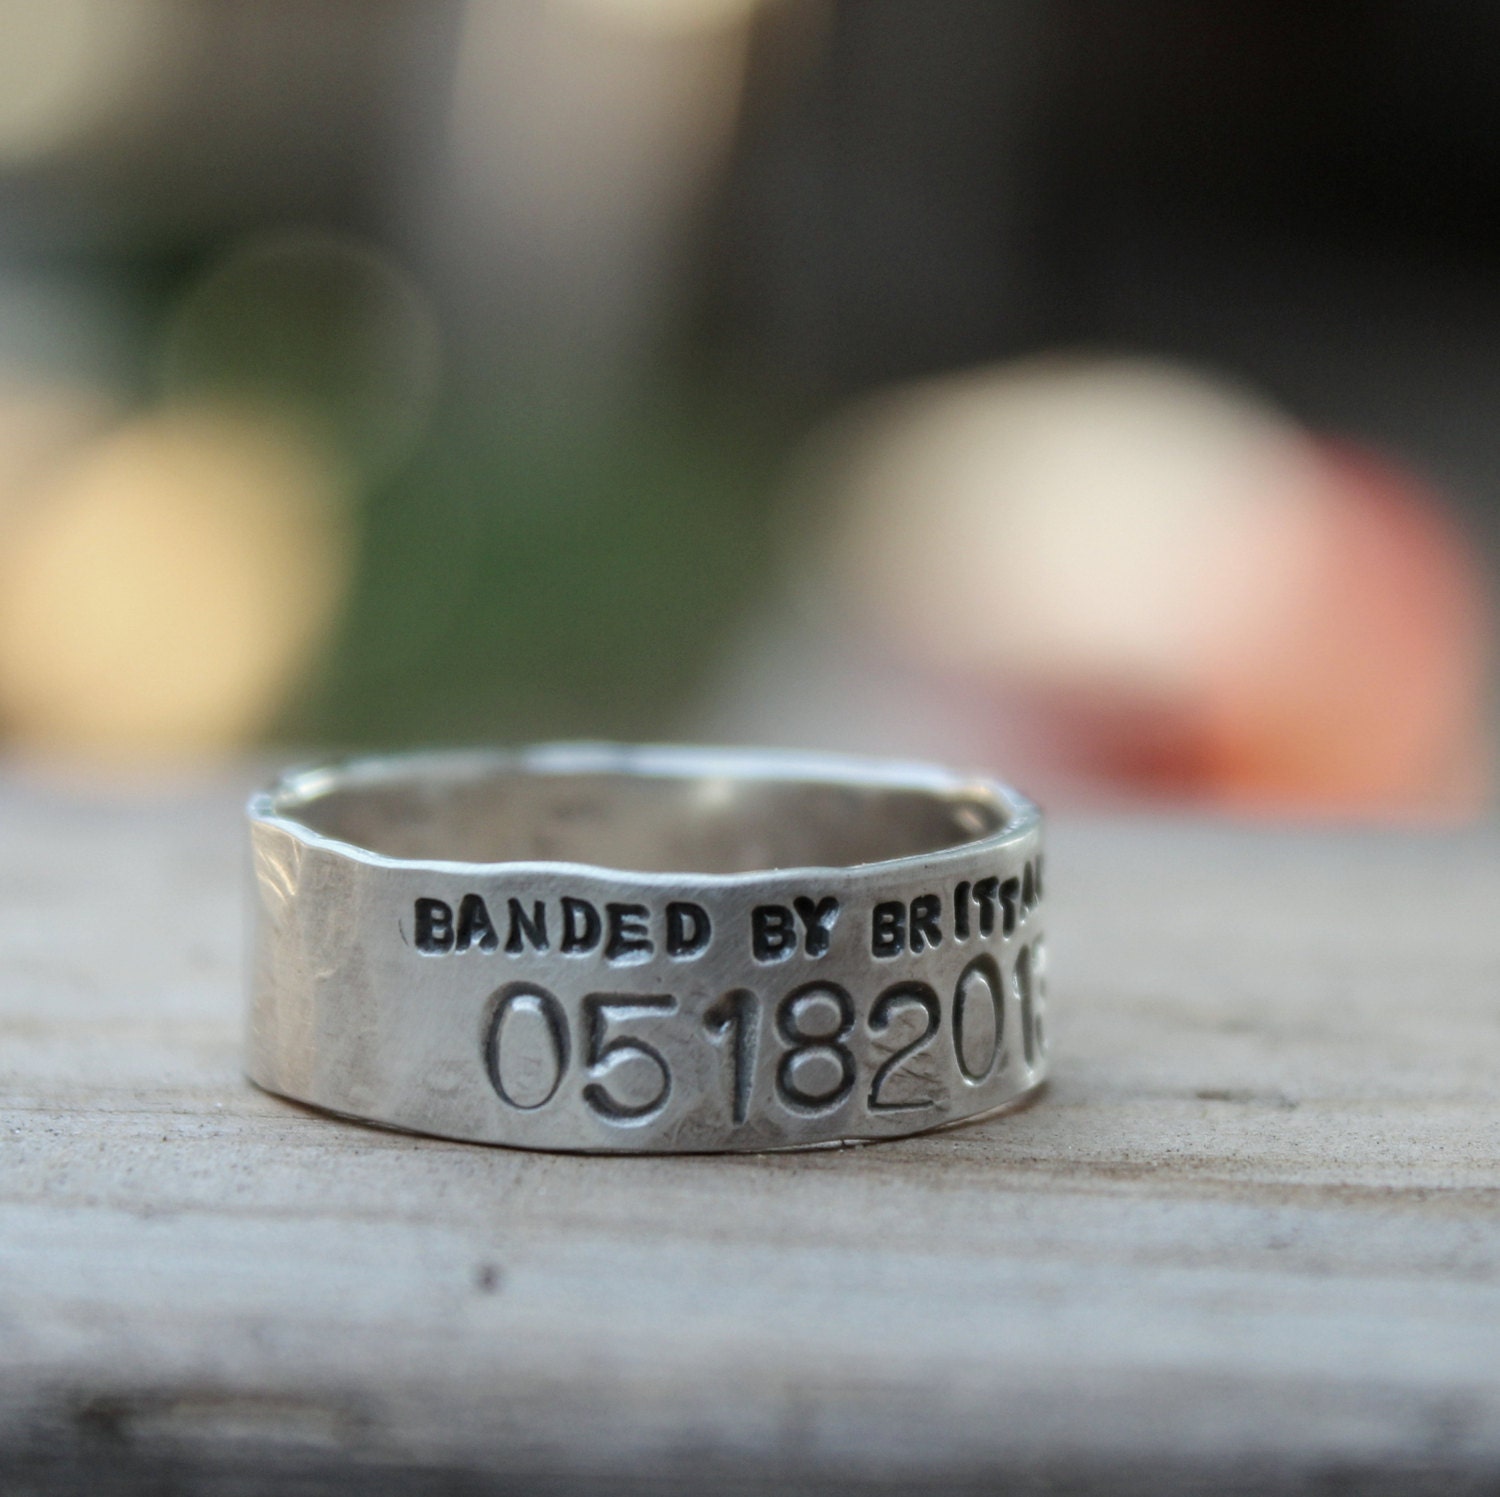 Narrow Duck Band Wedding Ring for Men and Women - Unisex Personalized